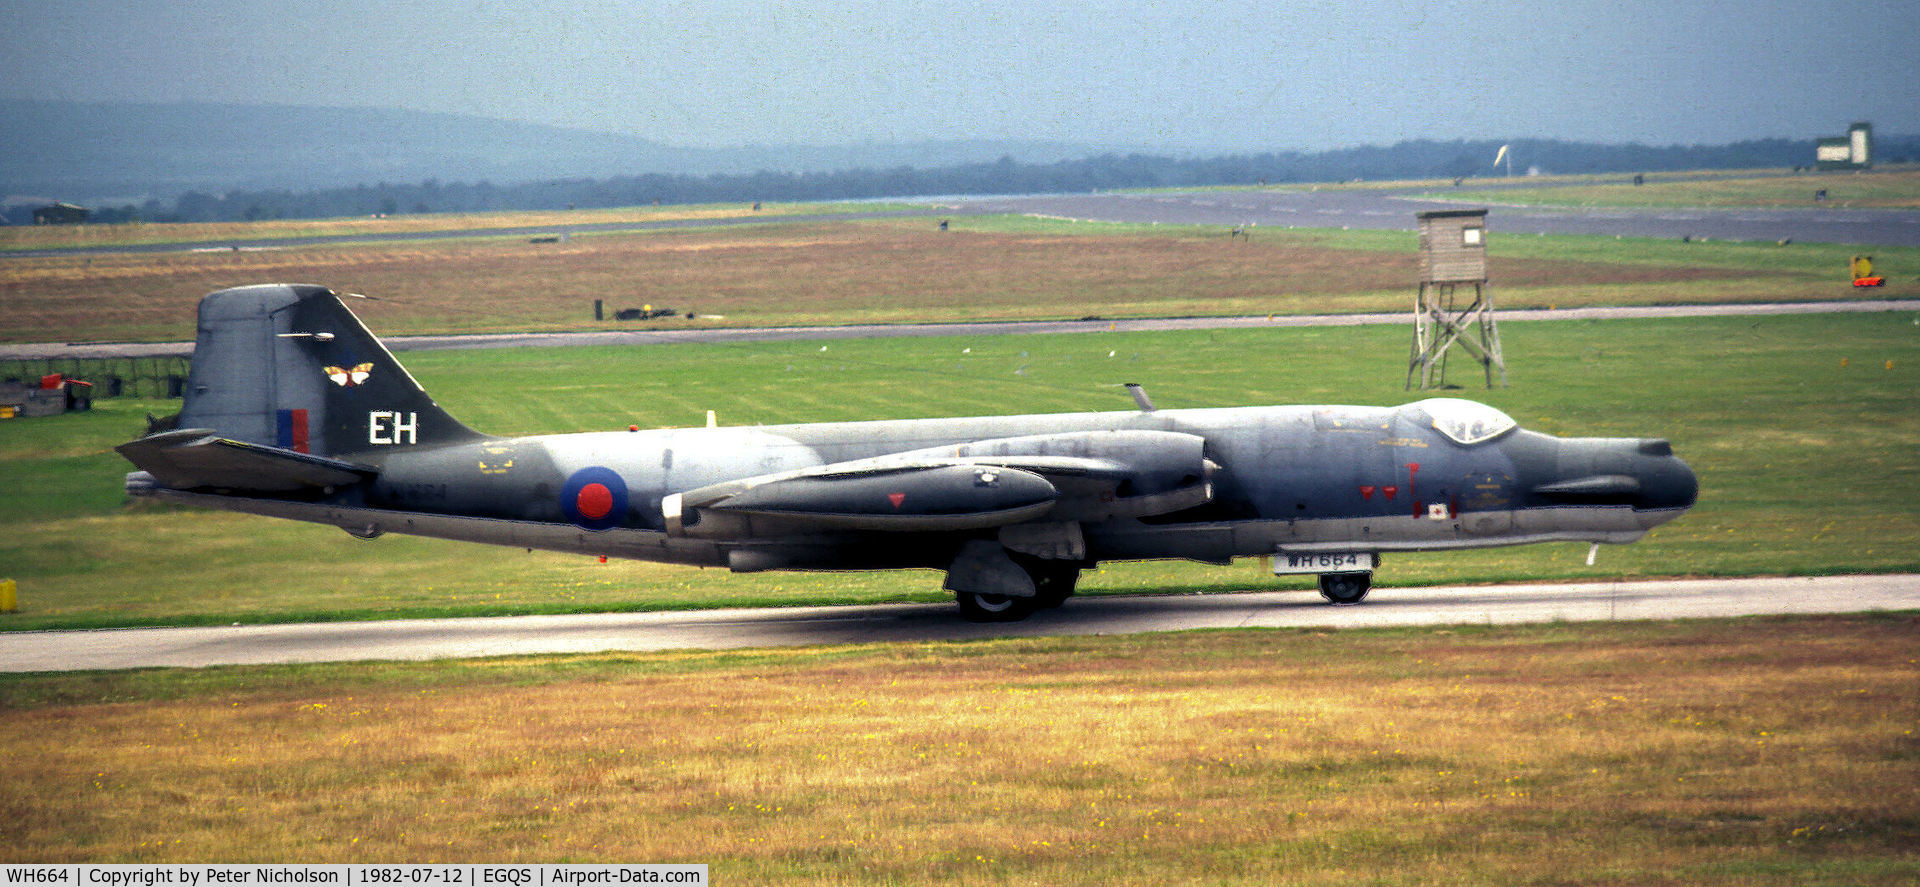 WH664, 1952 English Electric Canberra T.17 C/N EEP71136, Canberra T.17 of 360 Squadron at RAF Wyton preparing to join the active runway at RAF Lossiemouth in the Summer of 1982.